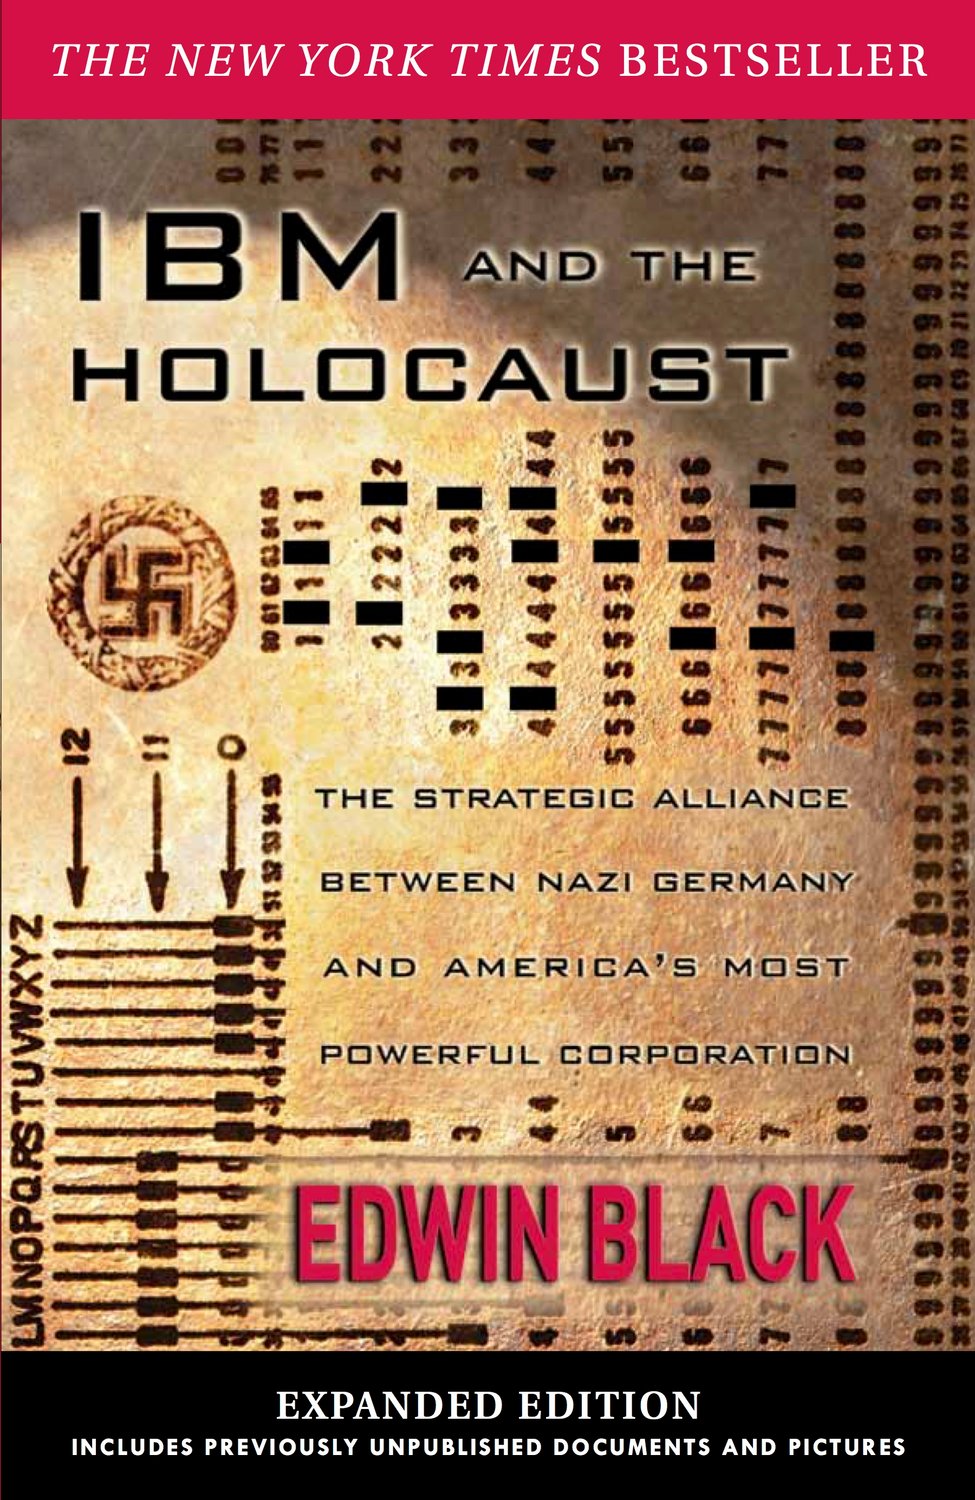 "IBM and the Holocaust" remains a best-seller 20 years after its first publication.